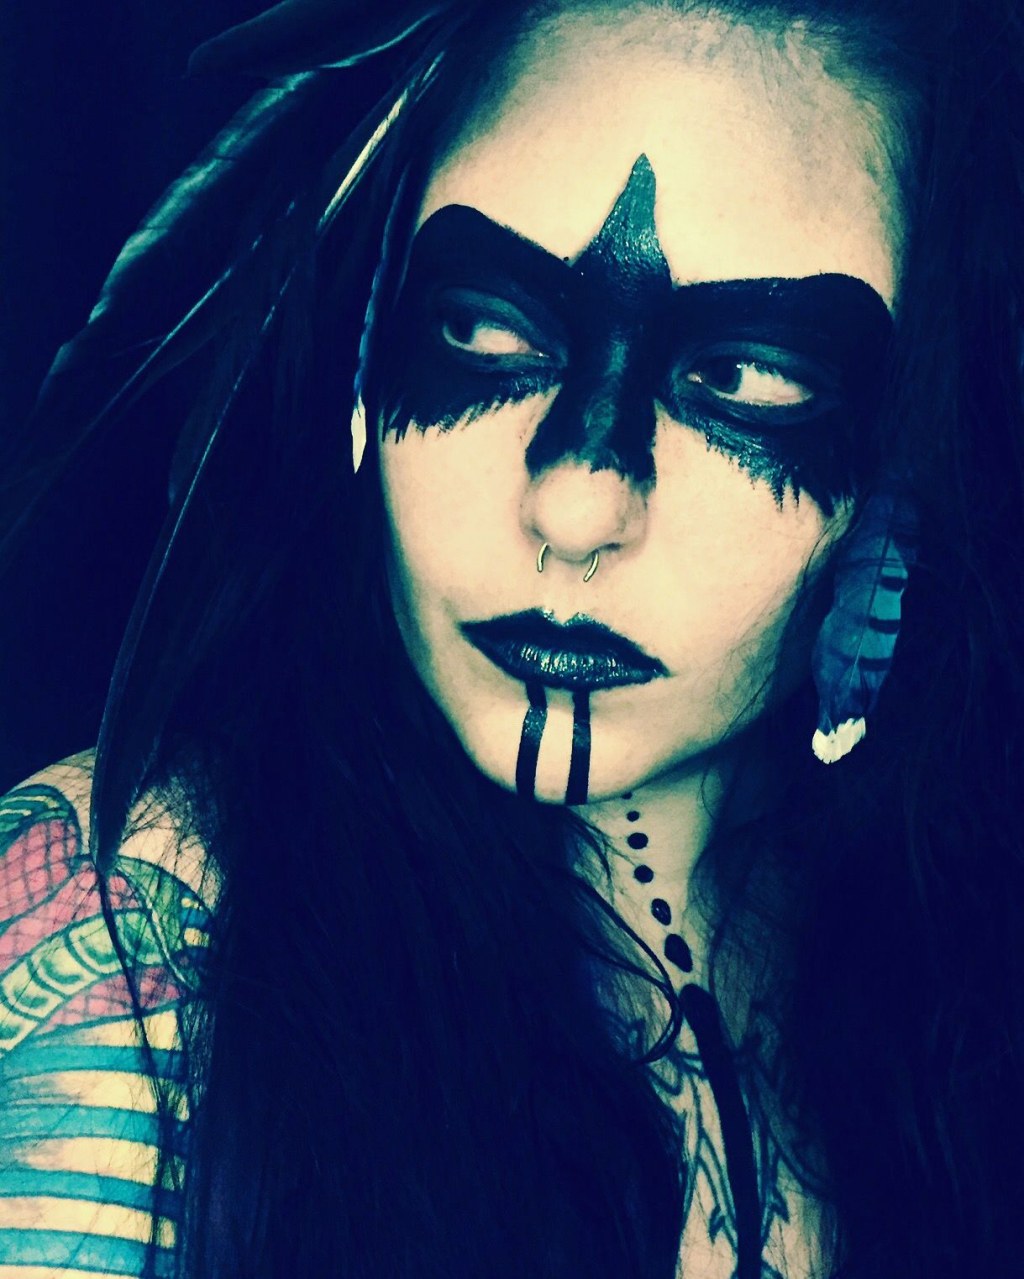 Picture of: Raven warrior crow Indian makeup face paint Halloween costume from